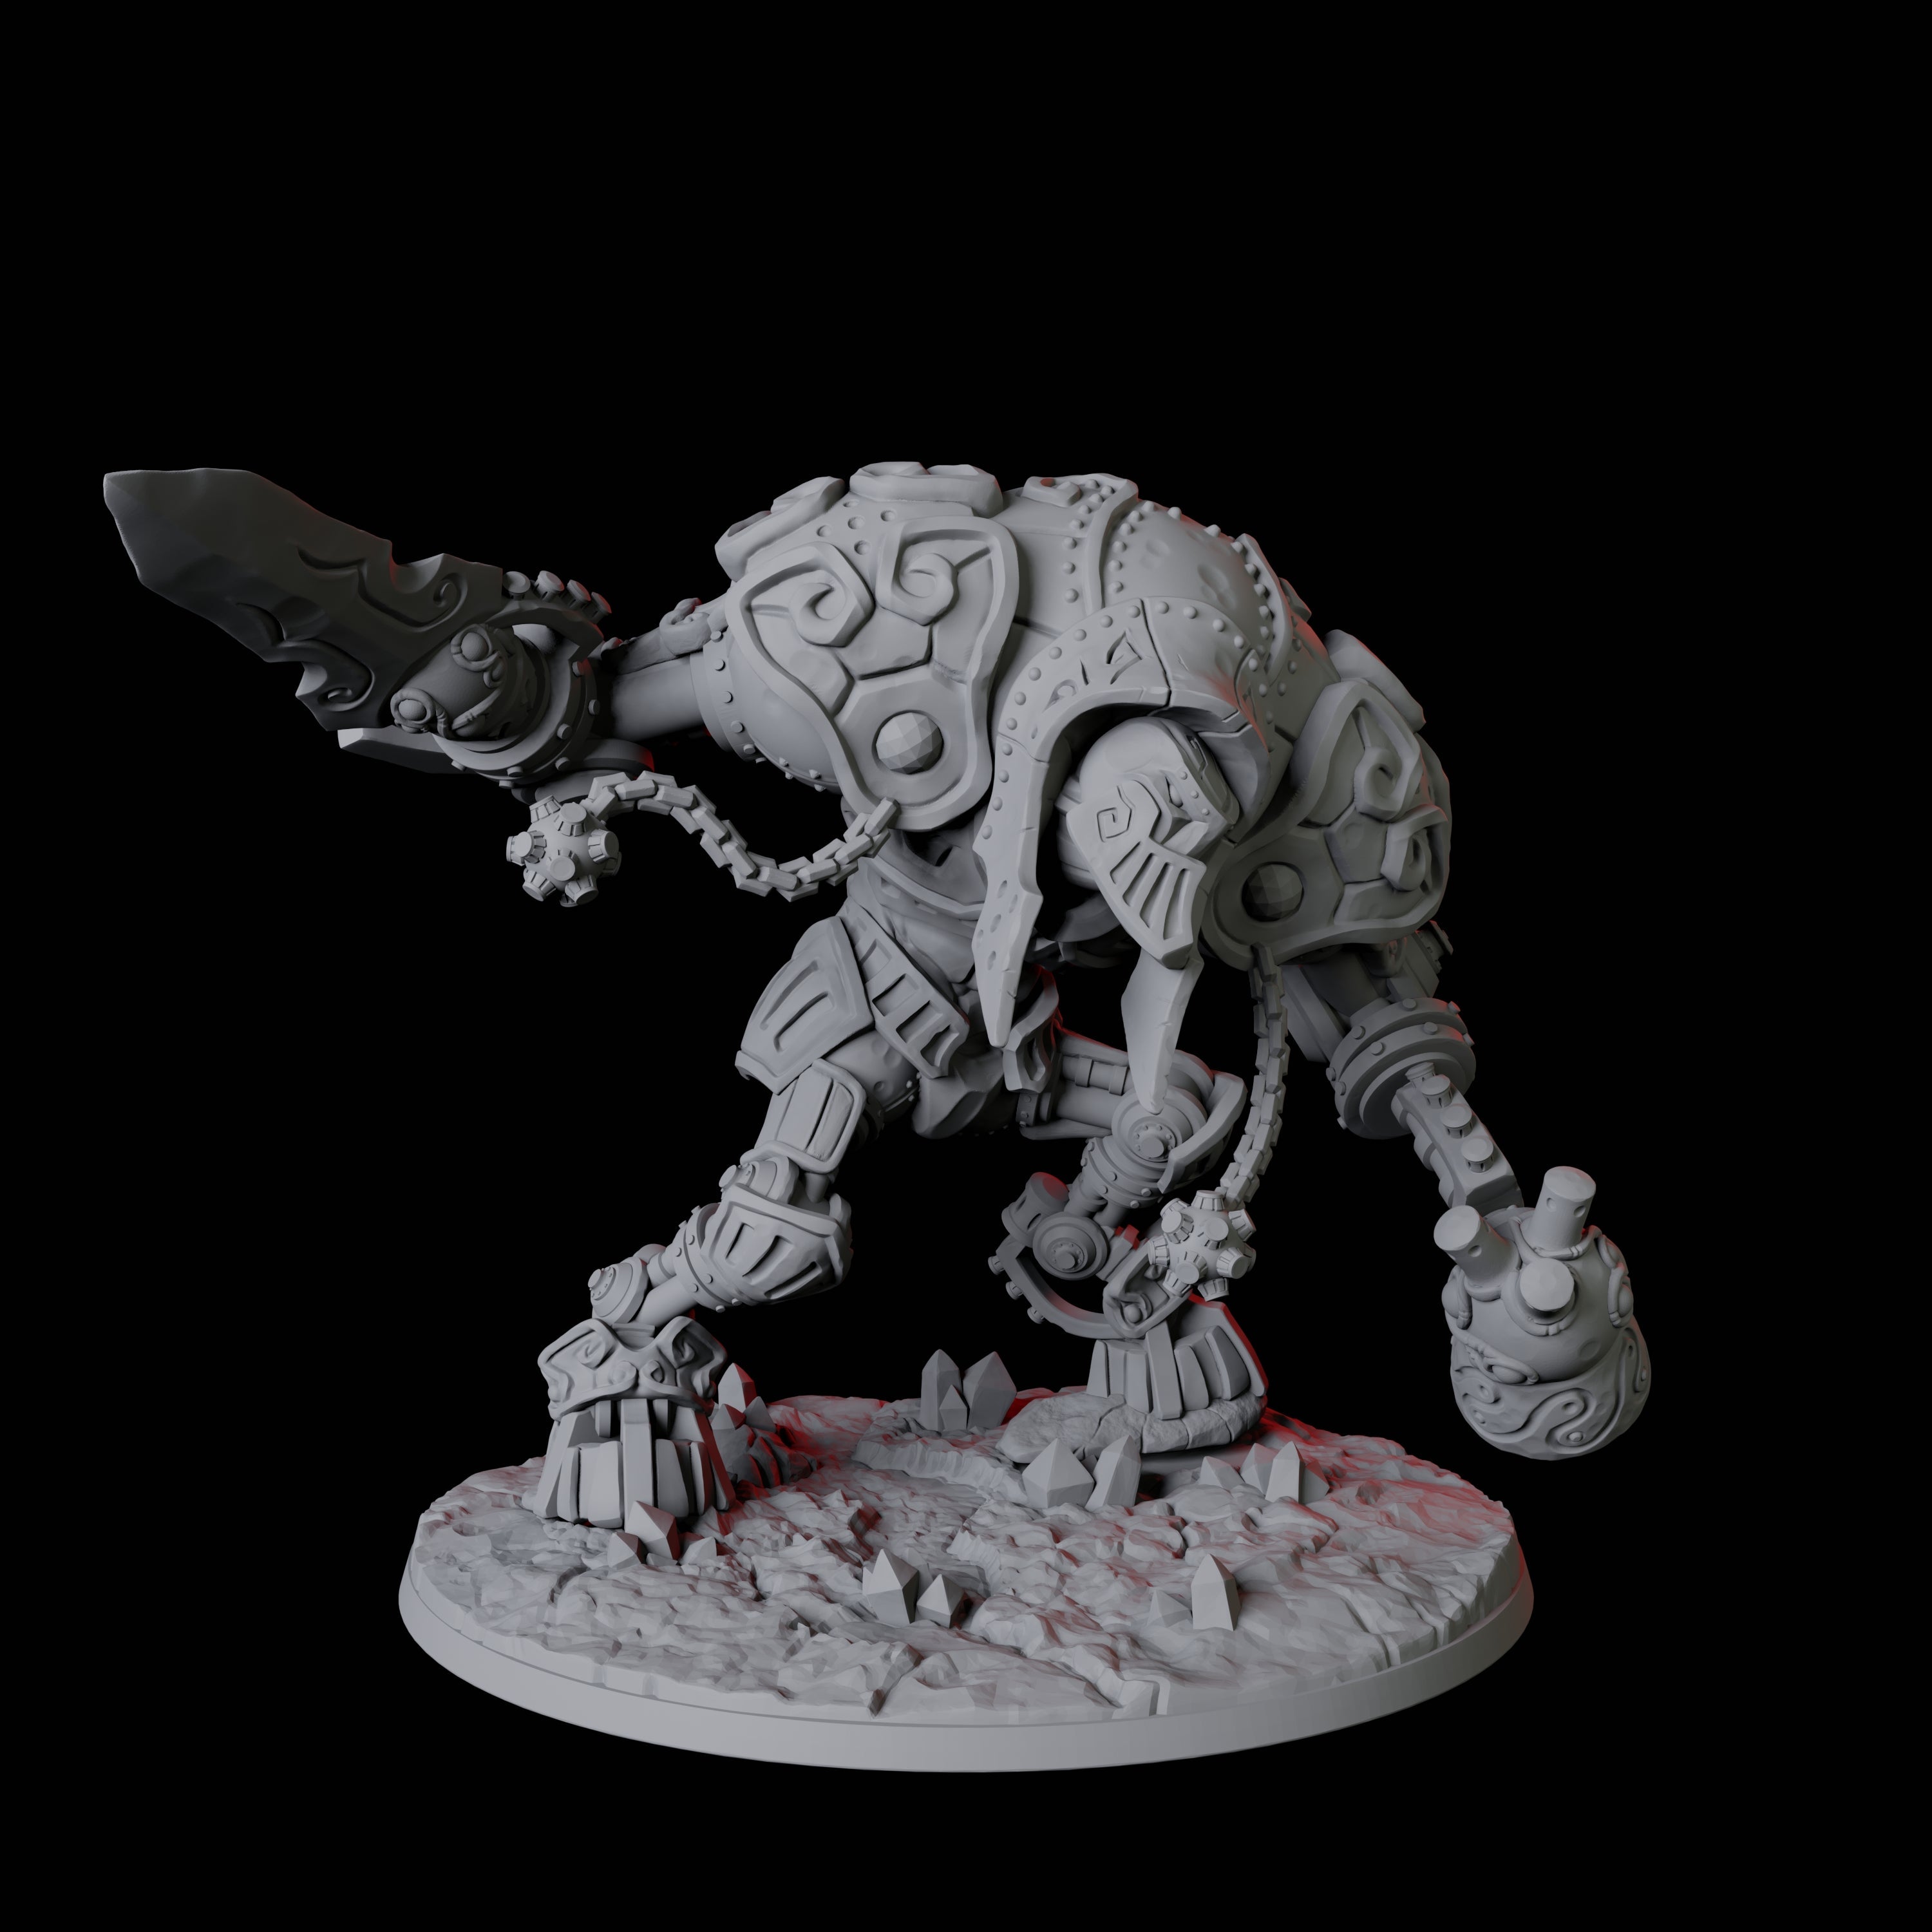 Warforged Armoured Golem Miniature for Dungeons and Dragons, Pathfinder or other TTRPGs